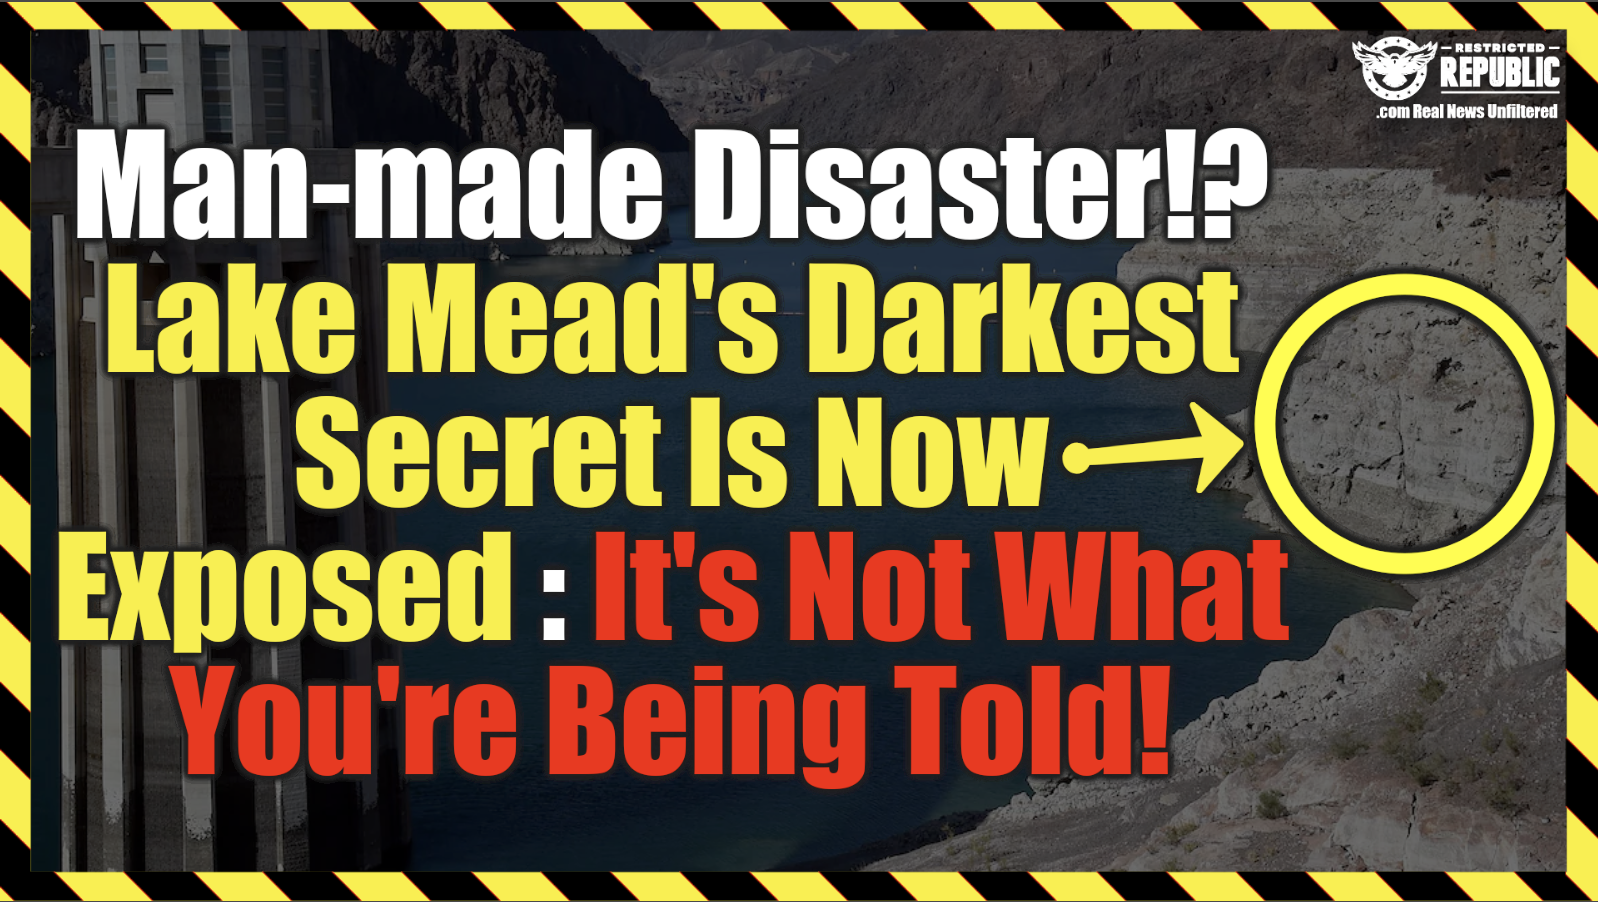 Man-Made Disaster! Lake Mead’s Darkest Secret Is Now Exposed: It’s Not What You’re Being Told!